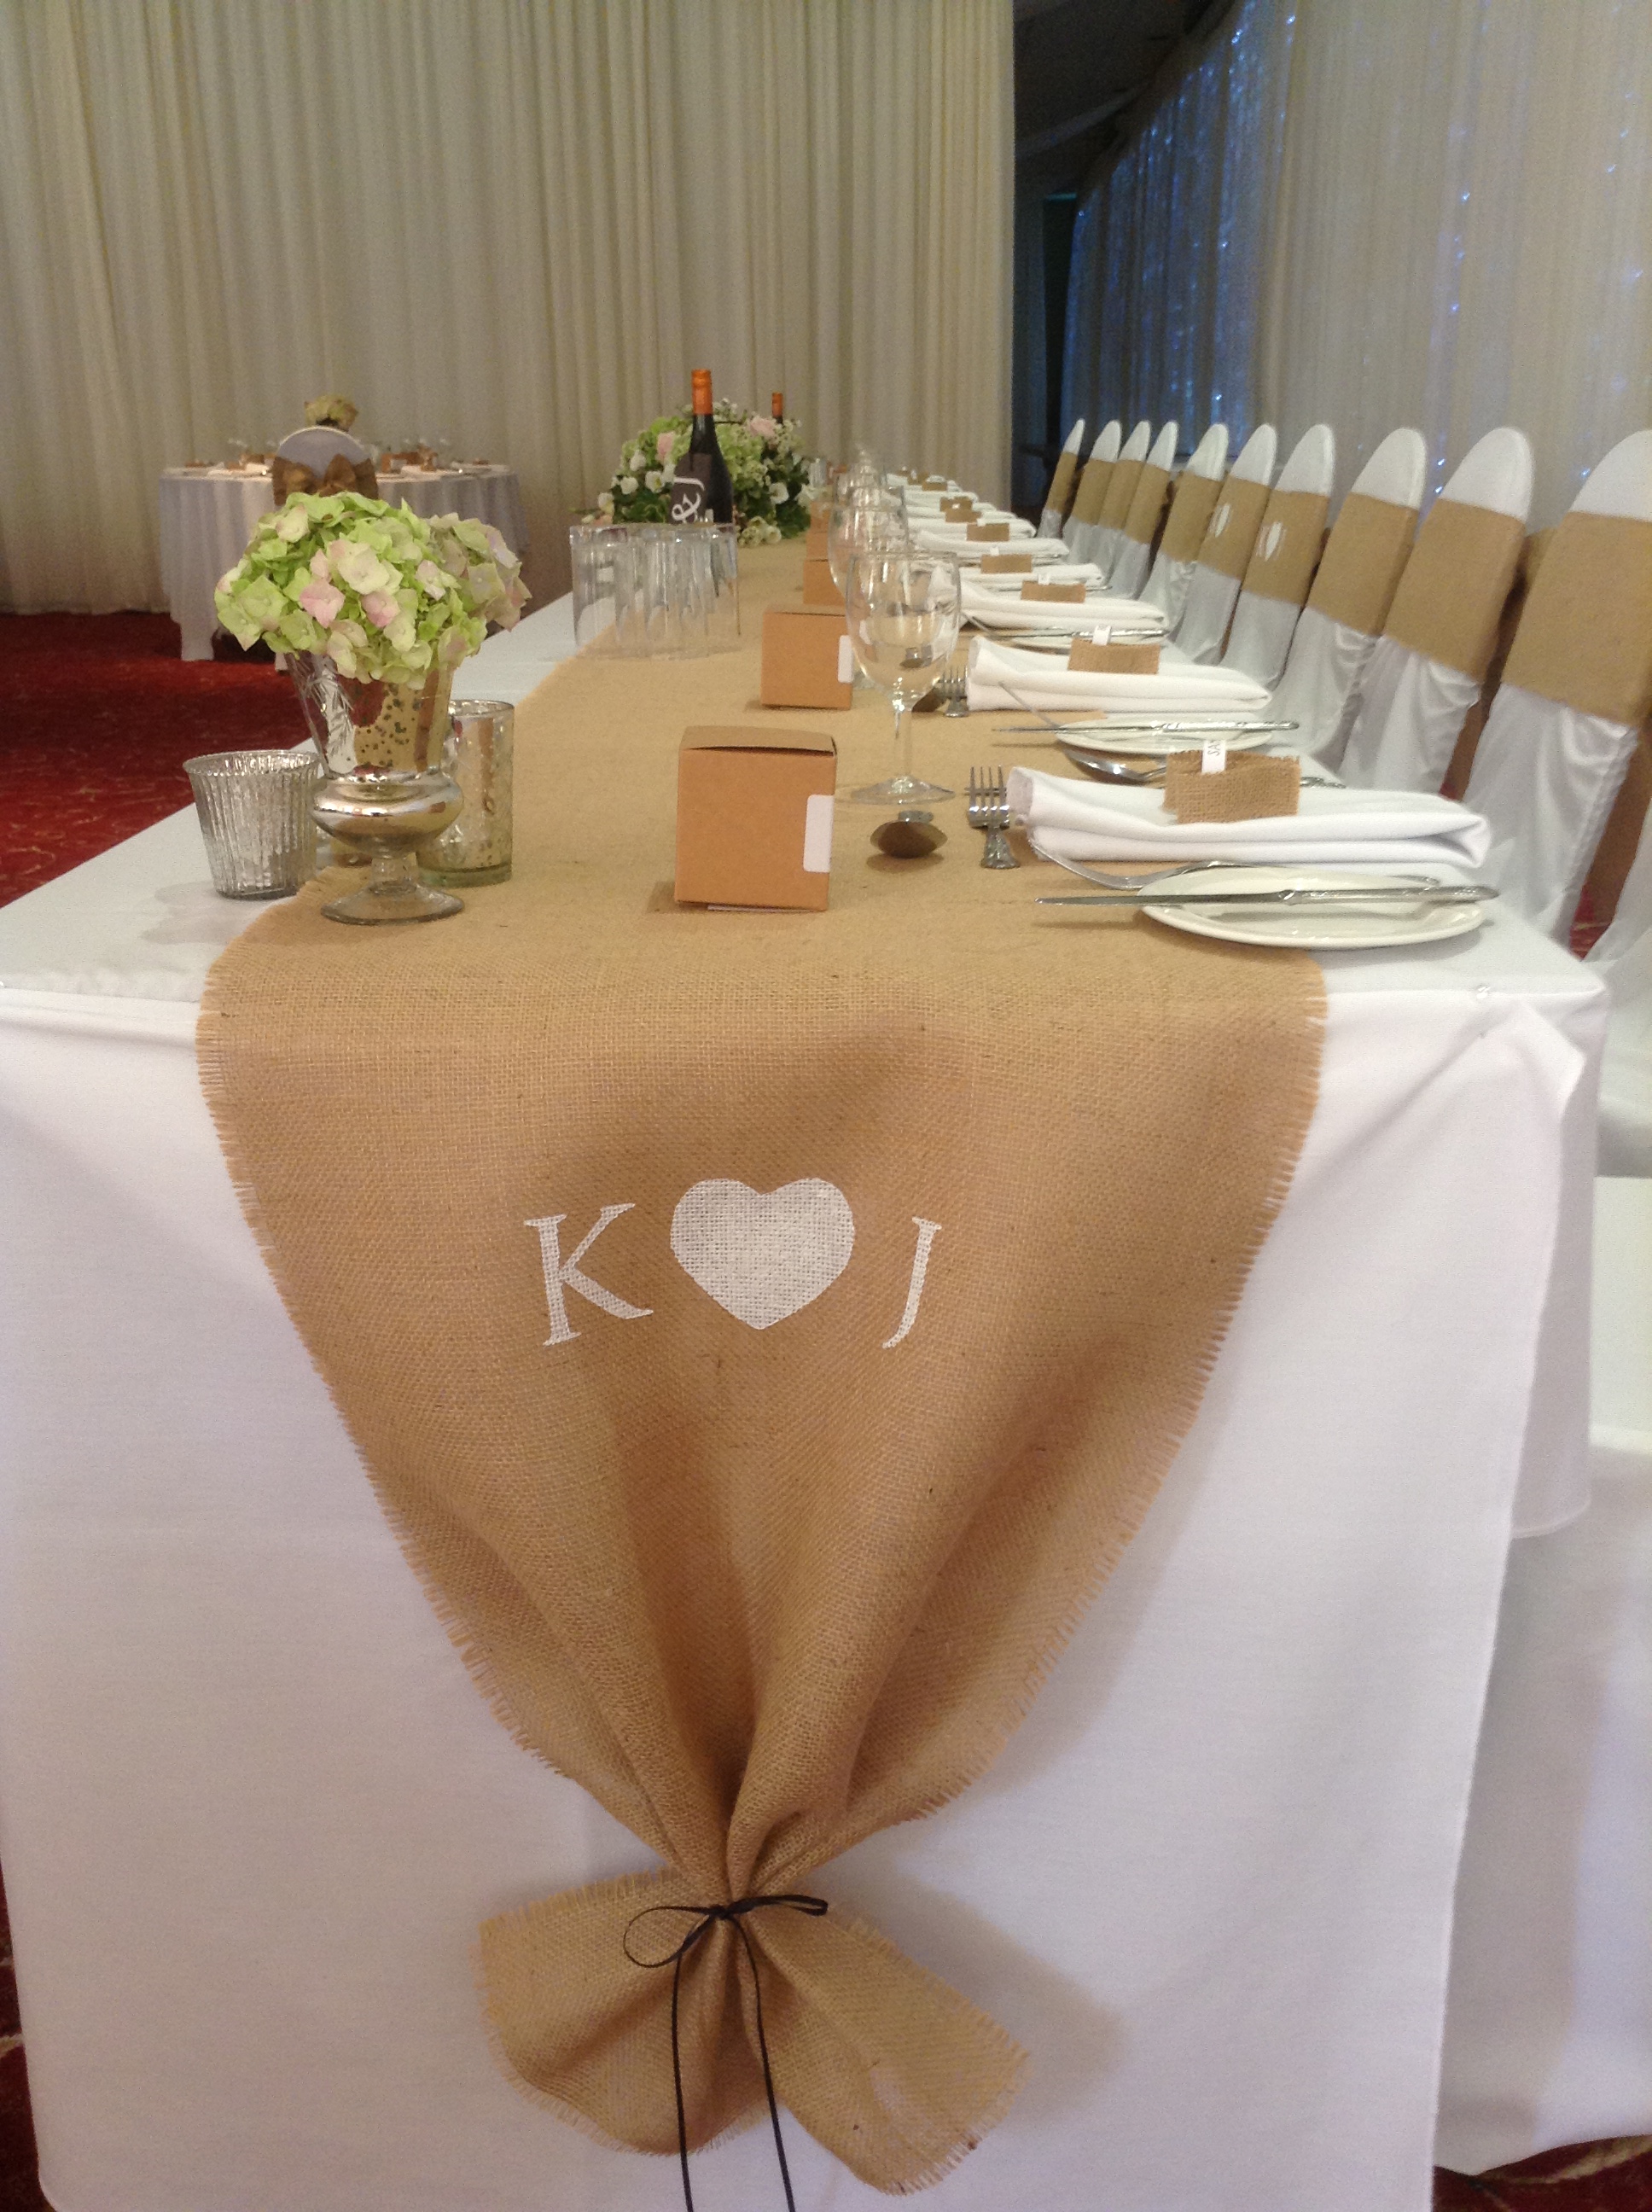 Their hessian table runner was personalised with their initials. By 